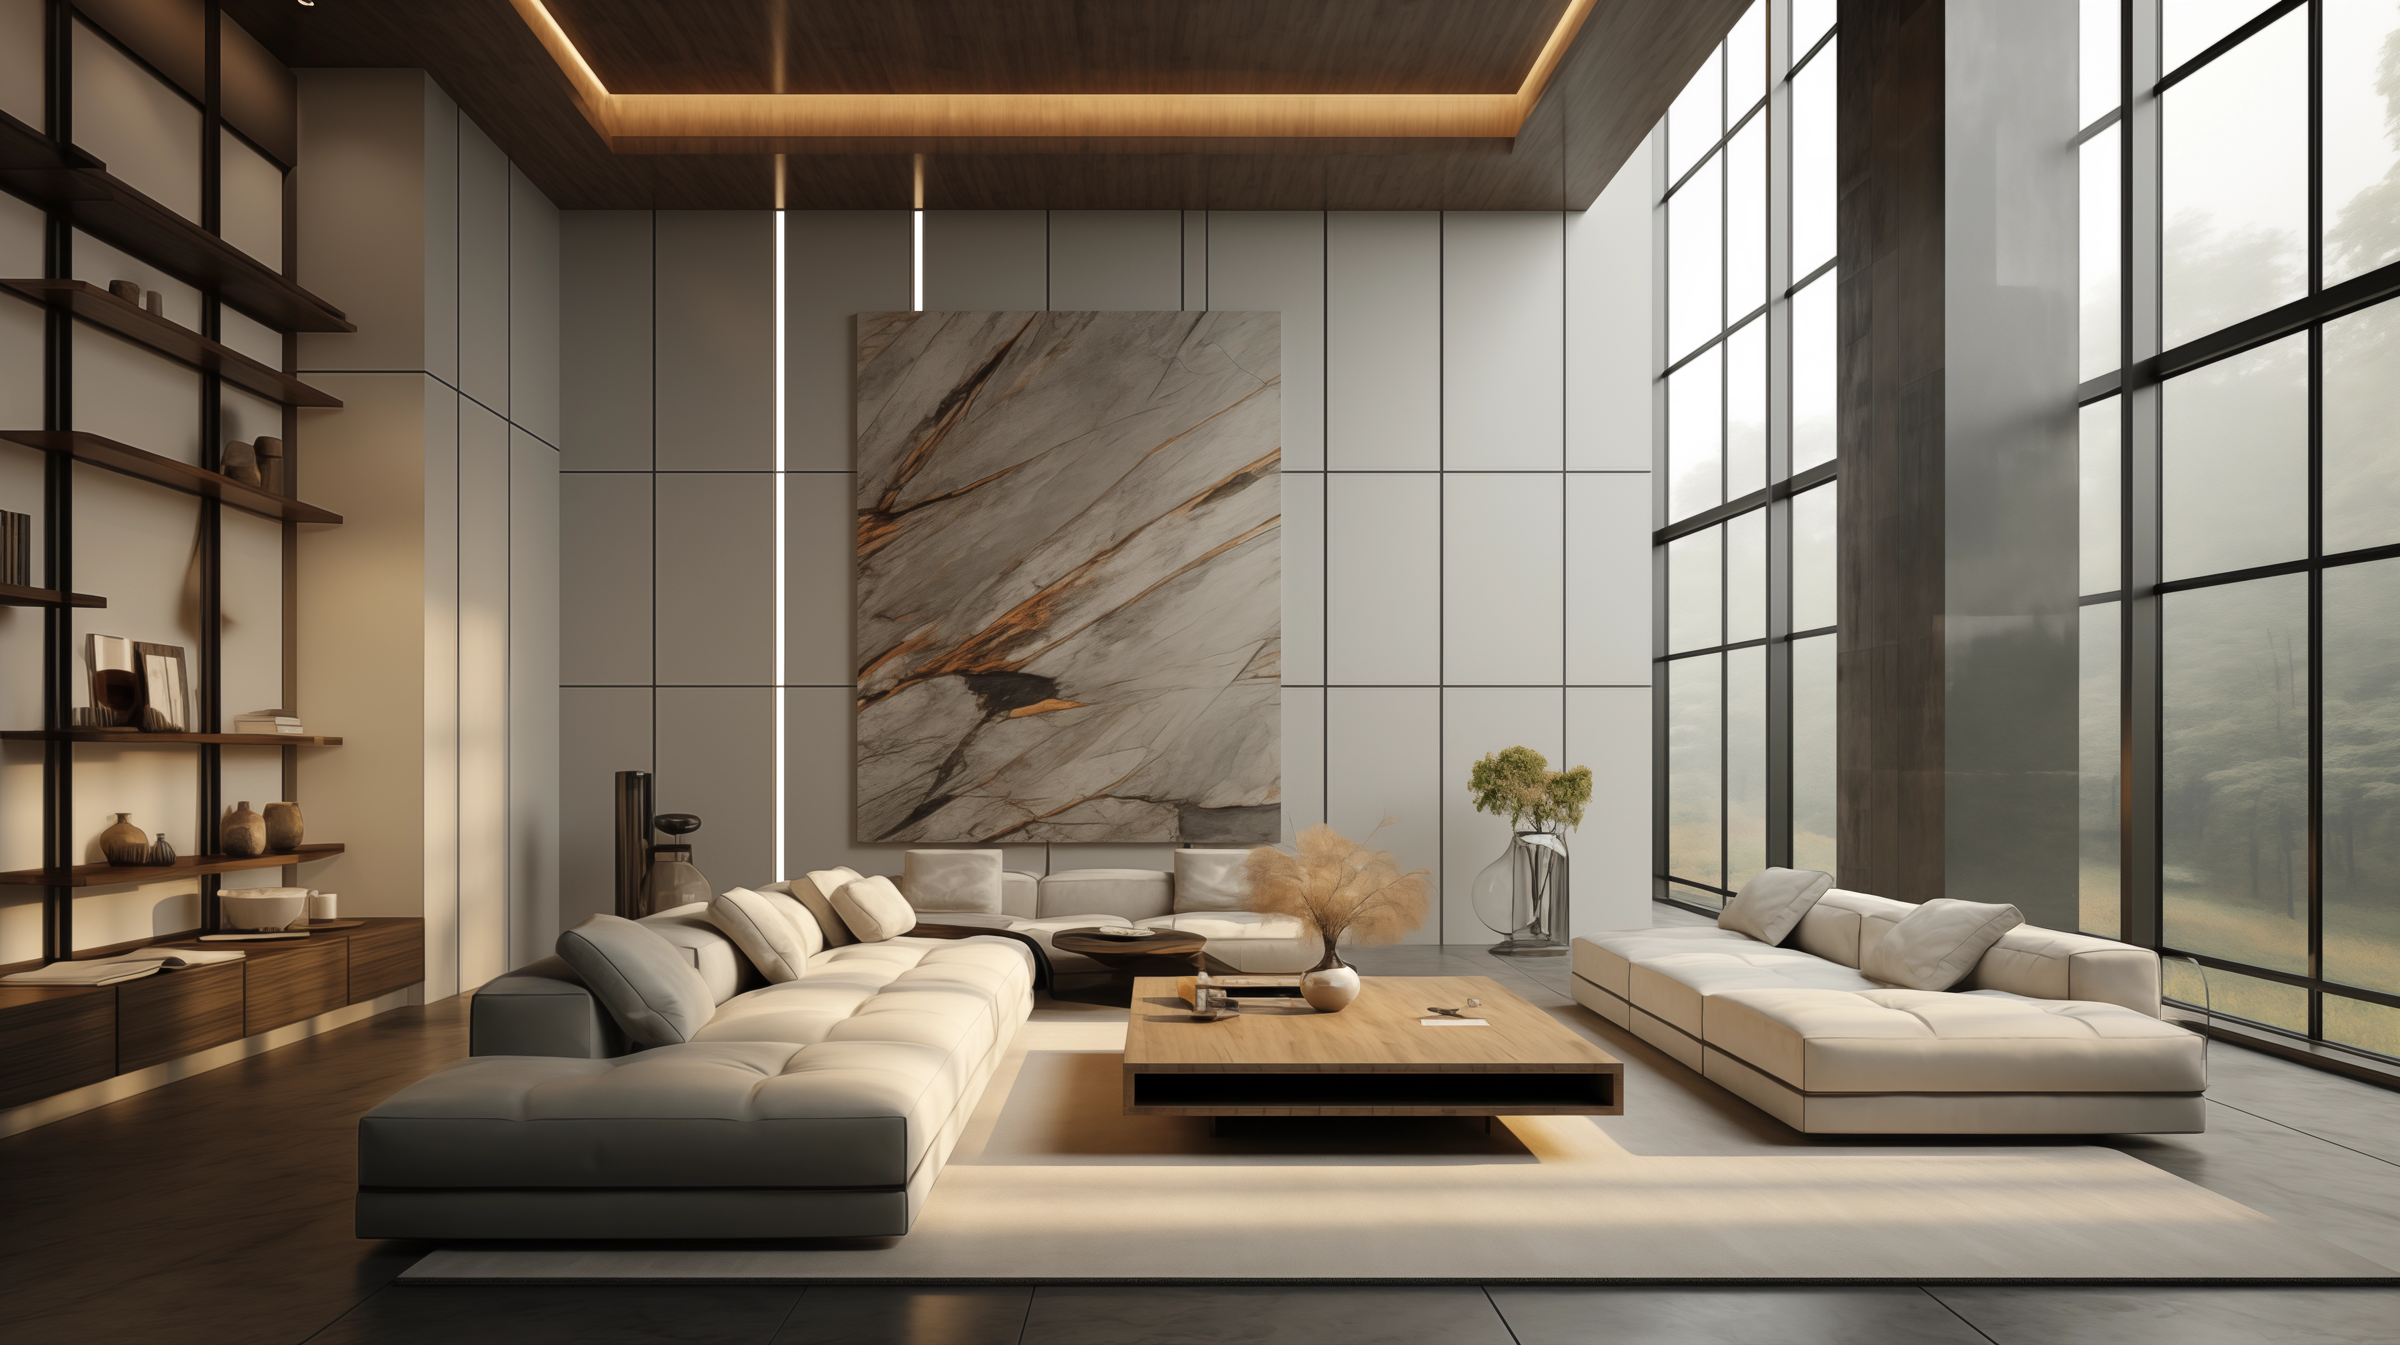 Spacious, minimalist luxury home interior with large-format stone panels on the living room walls. The room features a clean, modern aesthetic with sleek furniture, natural light from large windows, and seamless visual continuity.